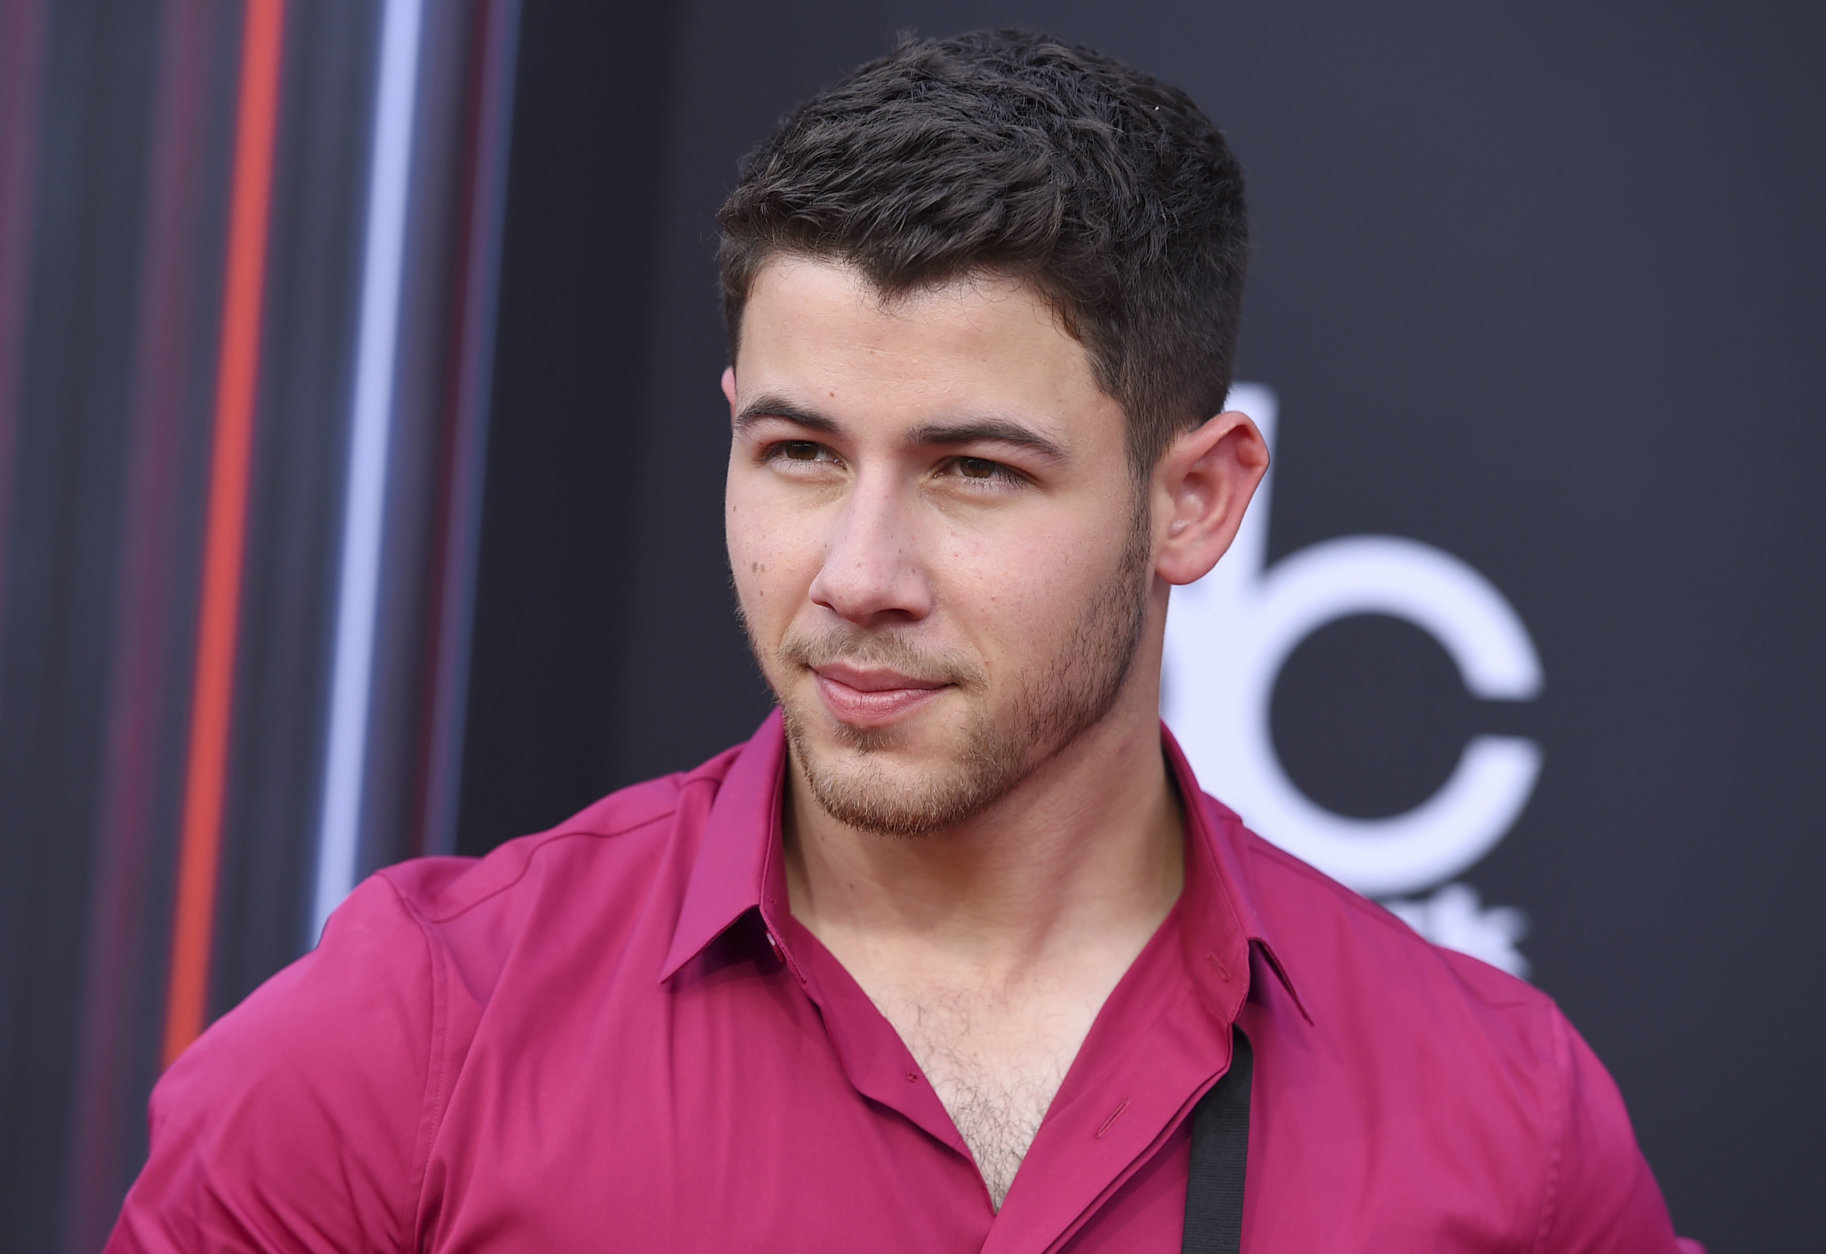 Nick Jonas arrives at the Billboard Music Awards at the MGM Grand Garden Arena on Sunday, May 20, 2018, in Las Vegas. (Photo by Jordan Strauss/Invision/AP)